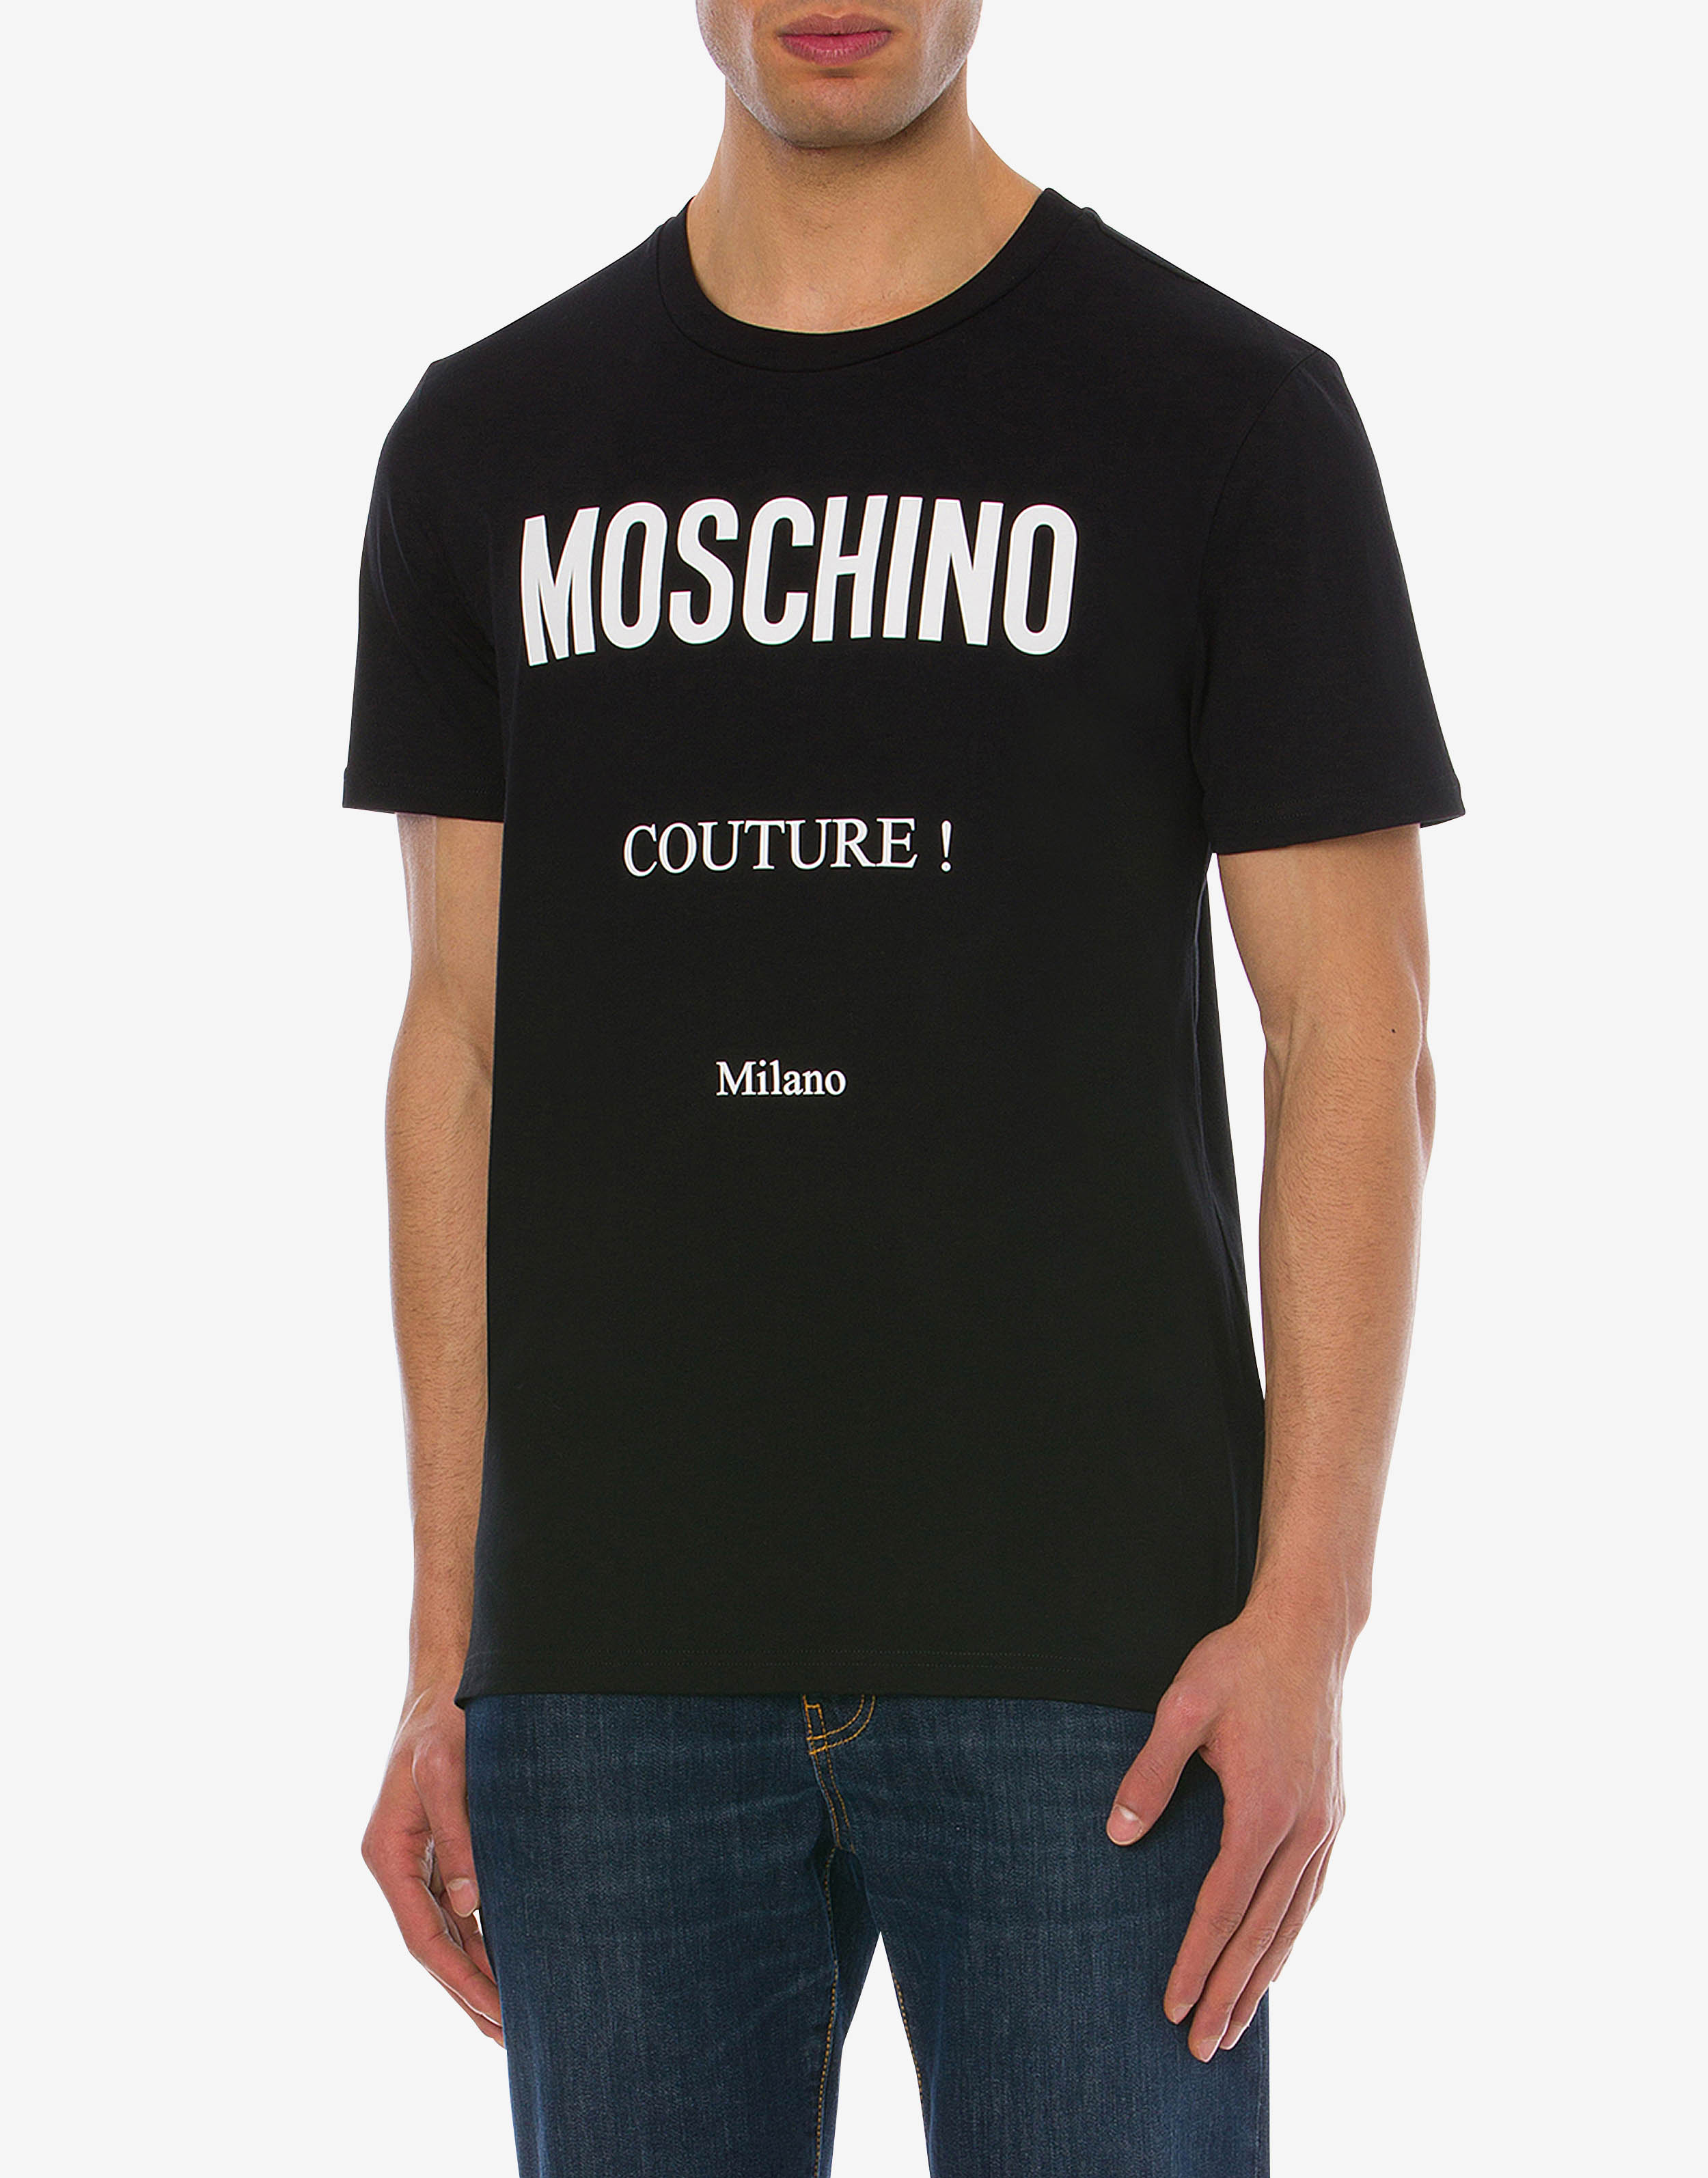 Store Jersey t-shirt | Official Moschino Moschino Couture